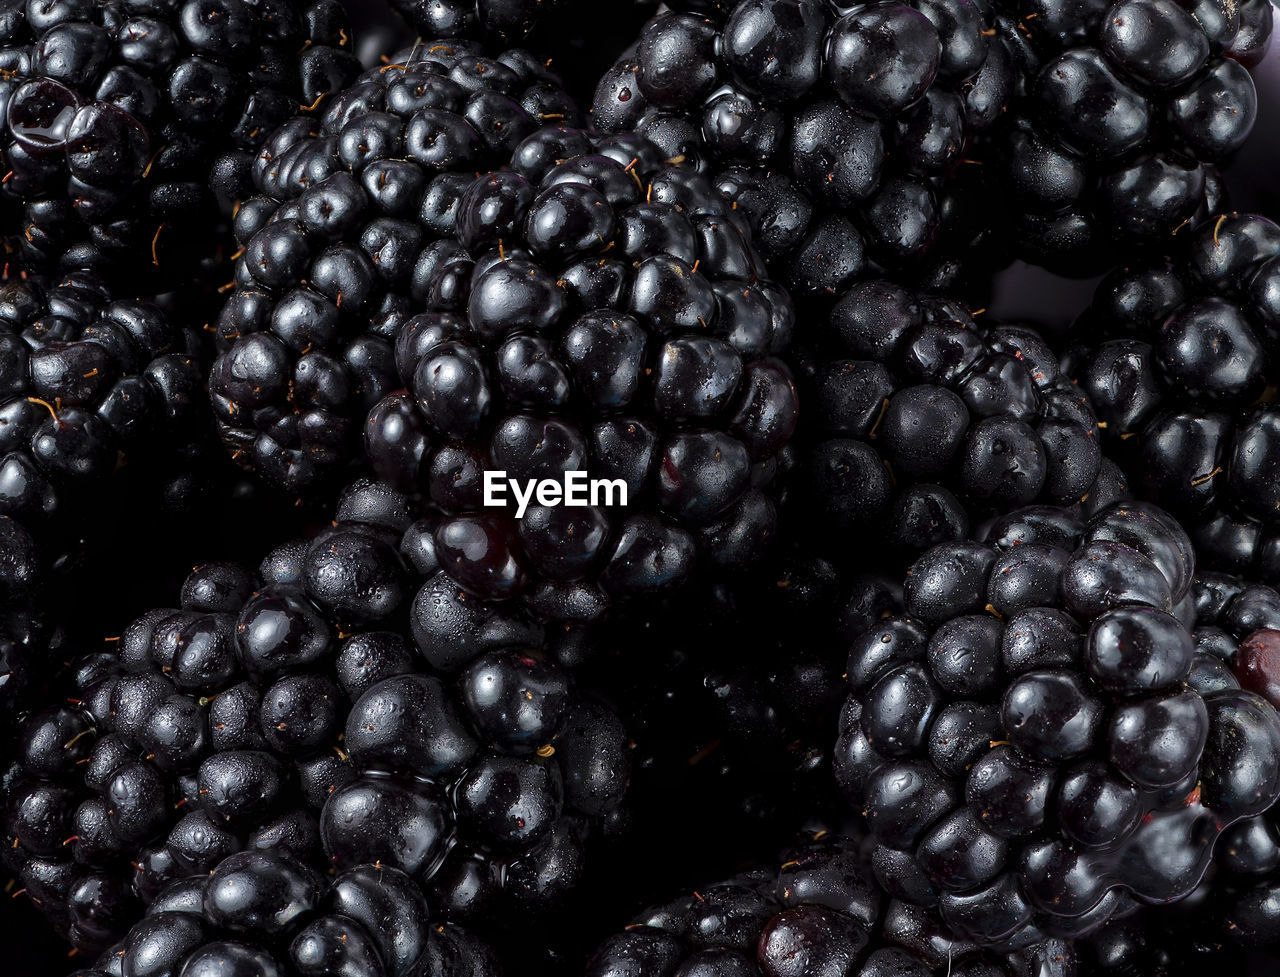 Many blackberries on a plate on a black background still life photography